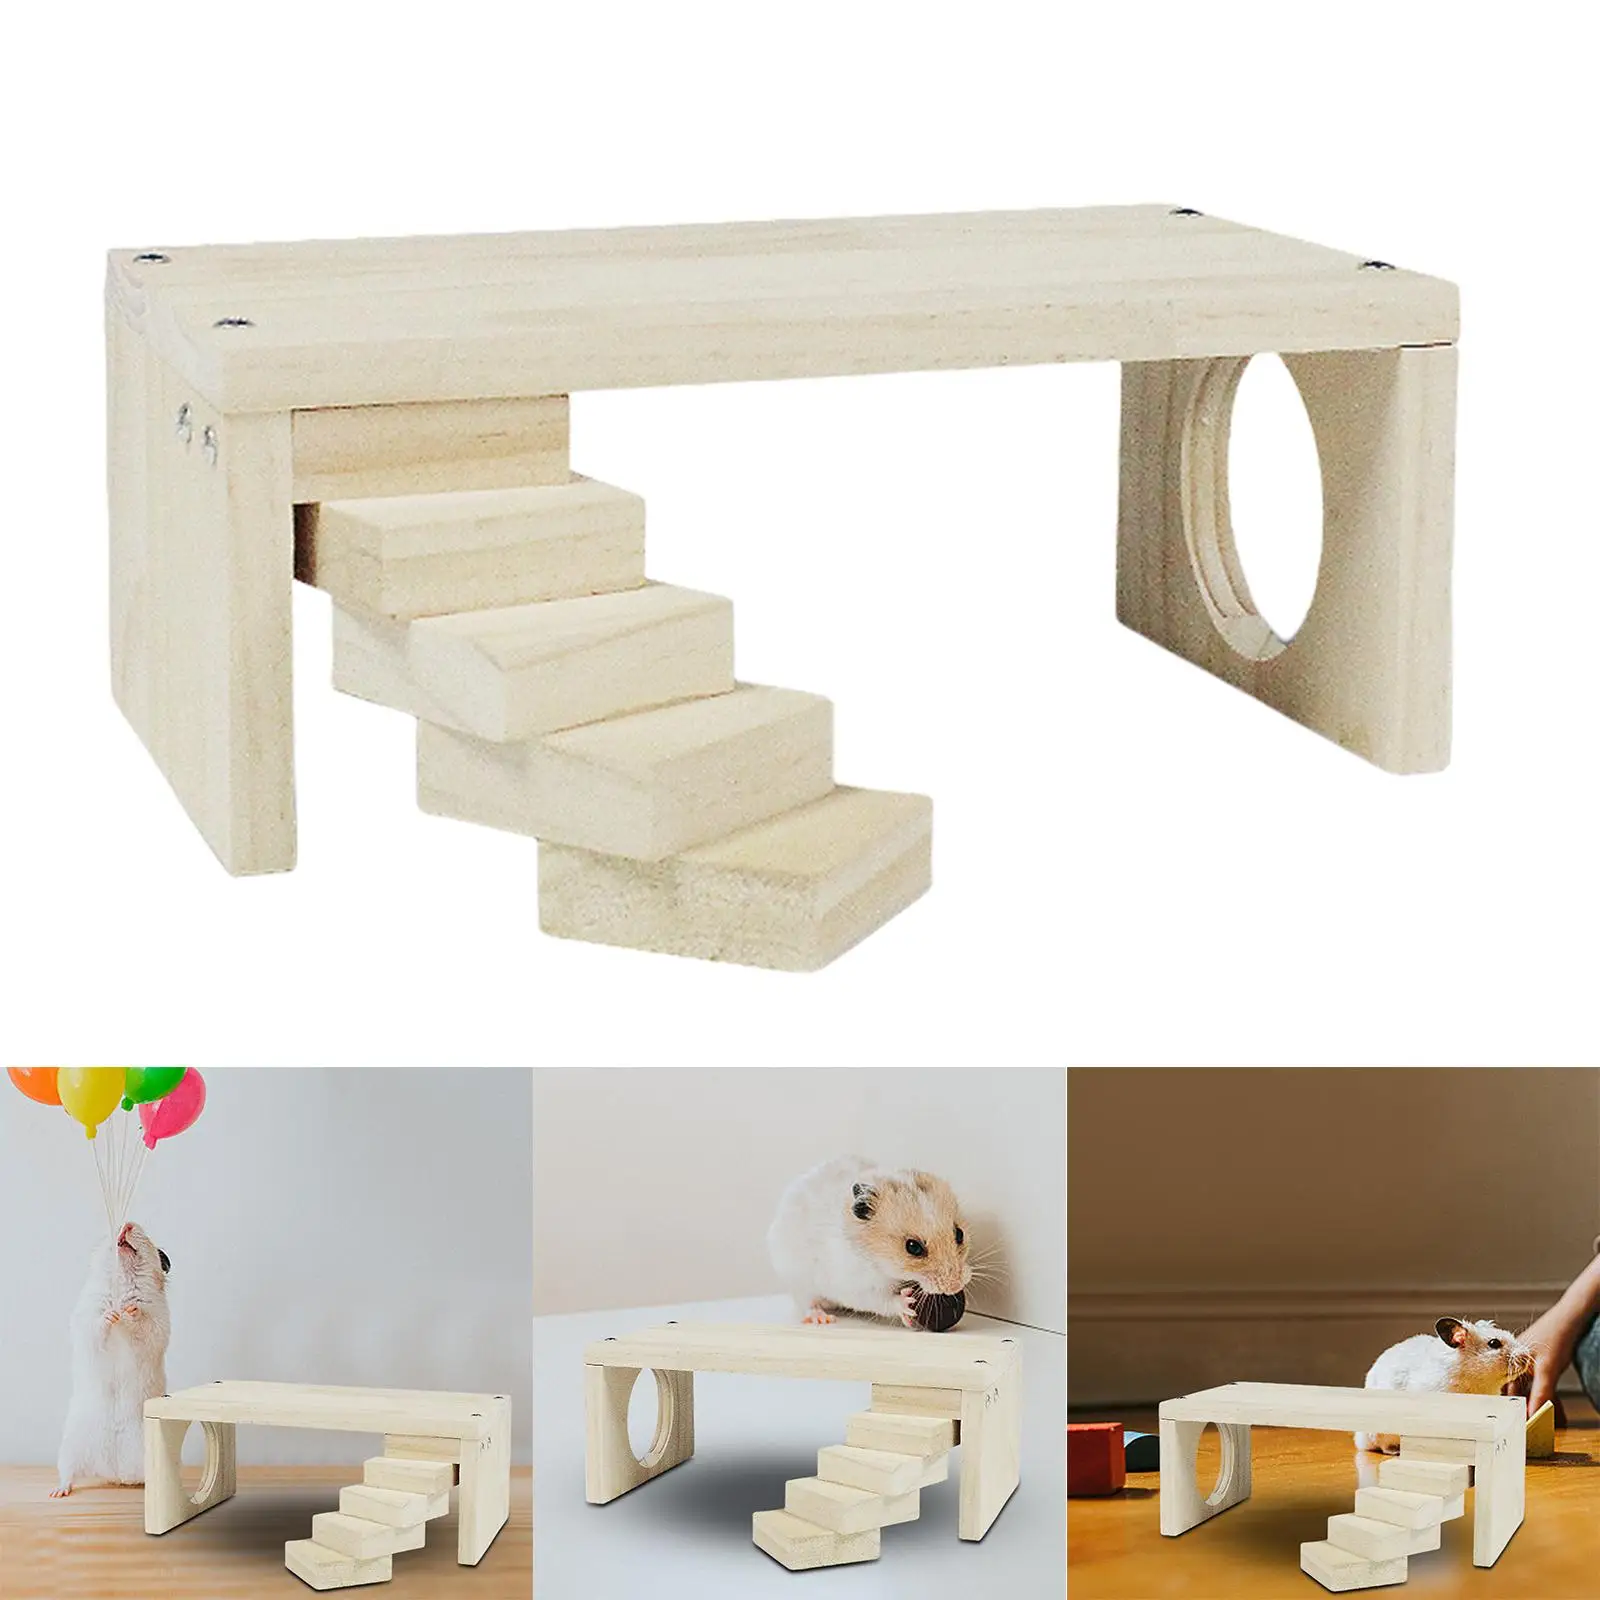 Hamster Climbing Toy Stairs Cage Playground Toys Landscaping Budgie Parakeet Climb Parrot Wooden Hamster Platform for Hamsters